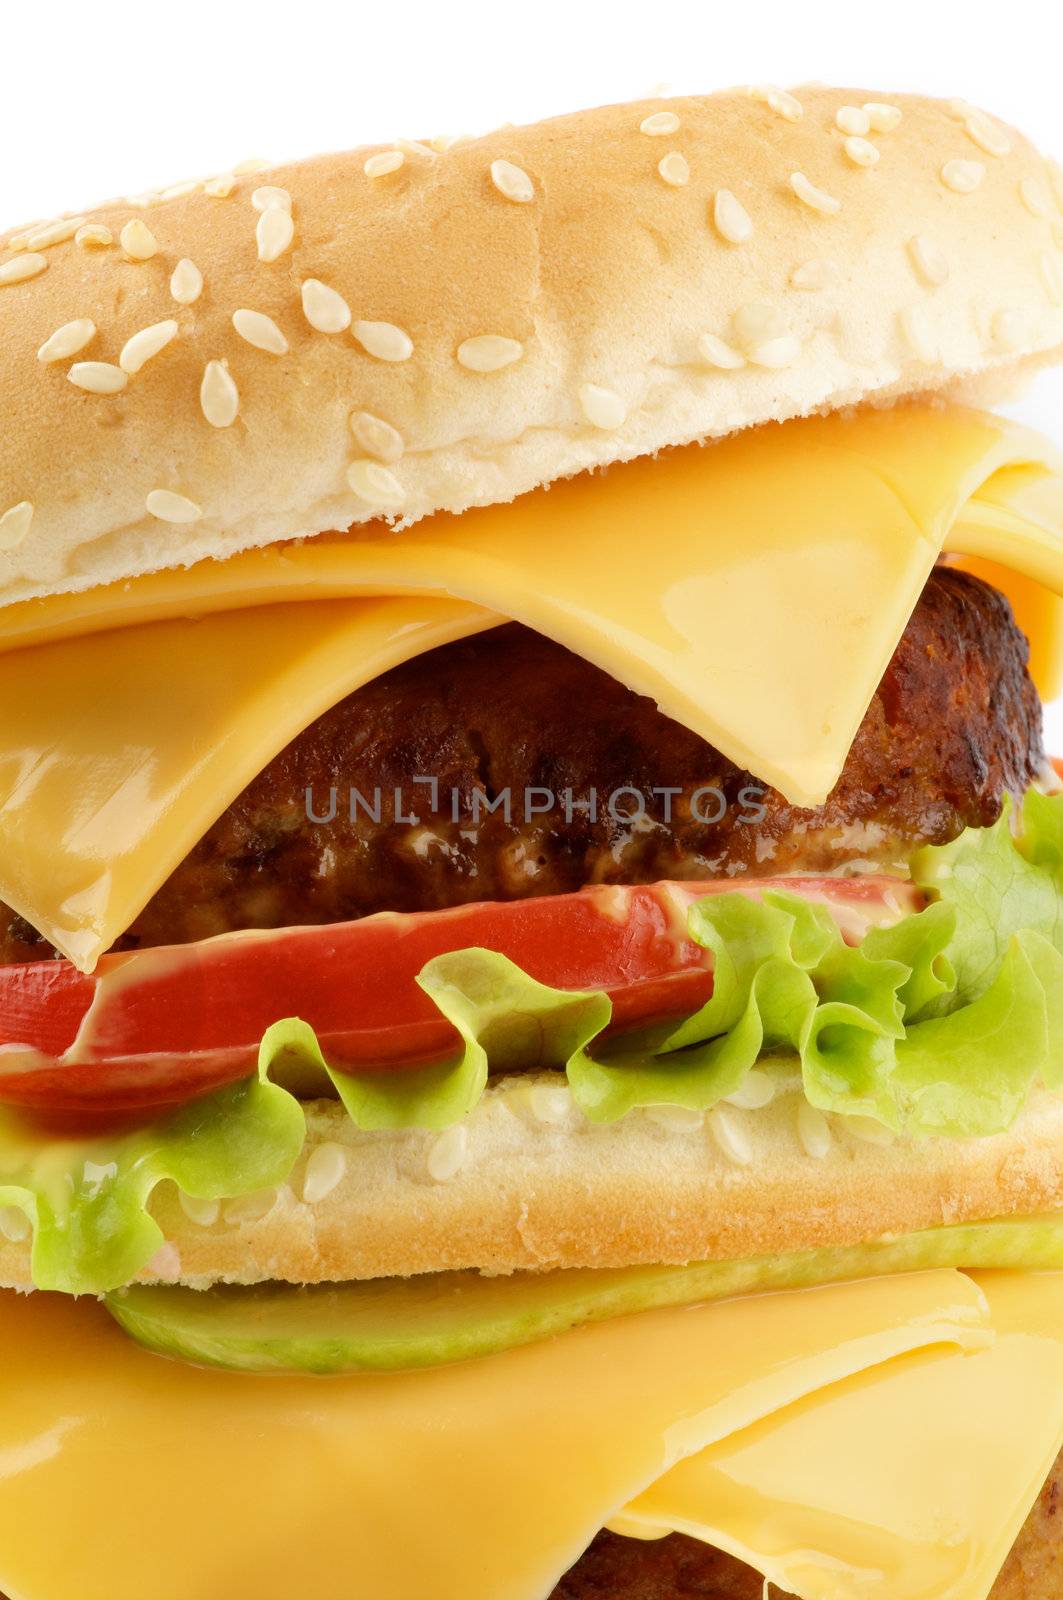 Tasty Cheeseburger with beef, tomato, lettuce and cheese closeup 